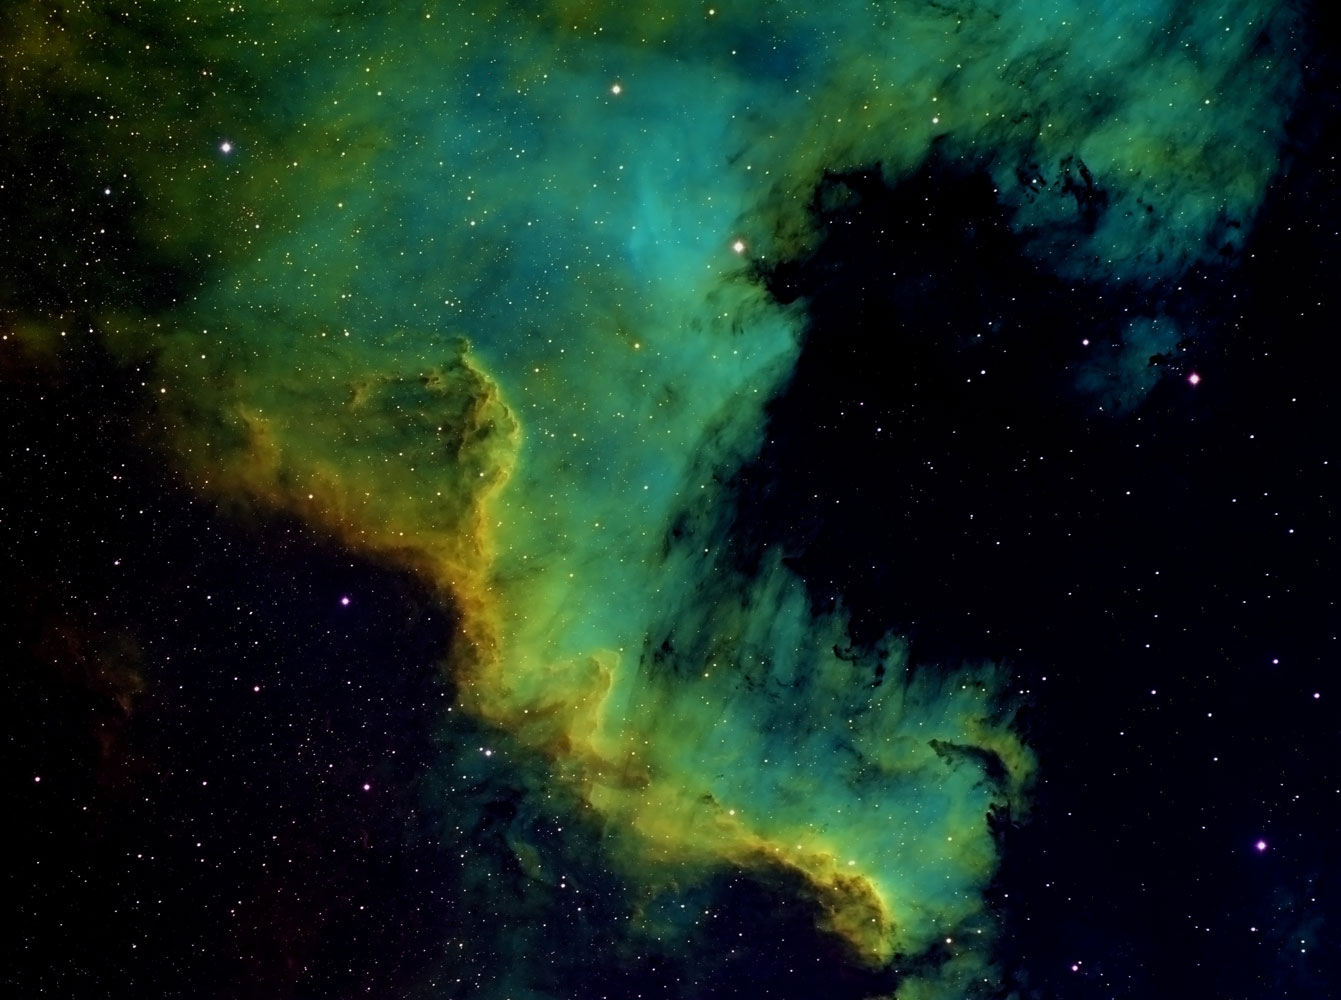 NGC 7000, also known as the North America Nebula, in the Cygnus Constellation, captured on May 21, 2014.